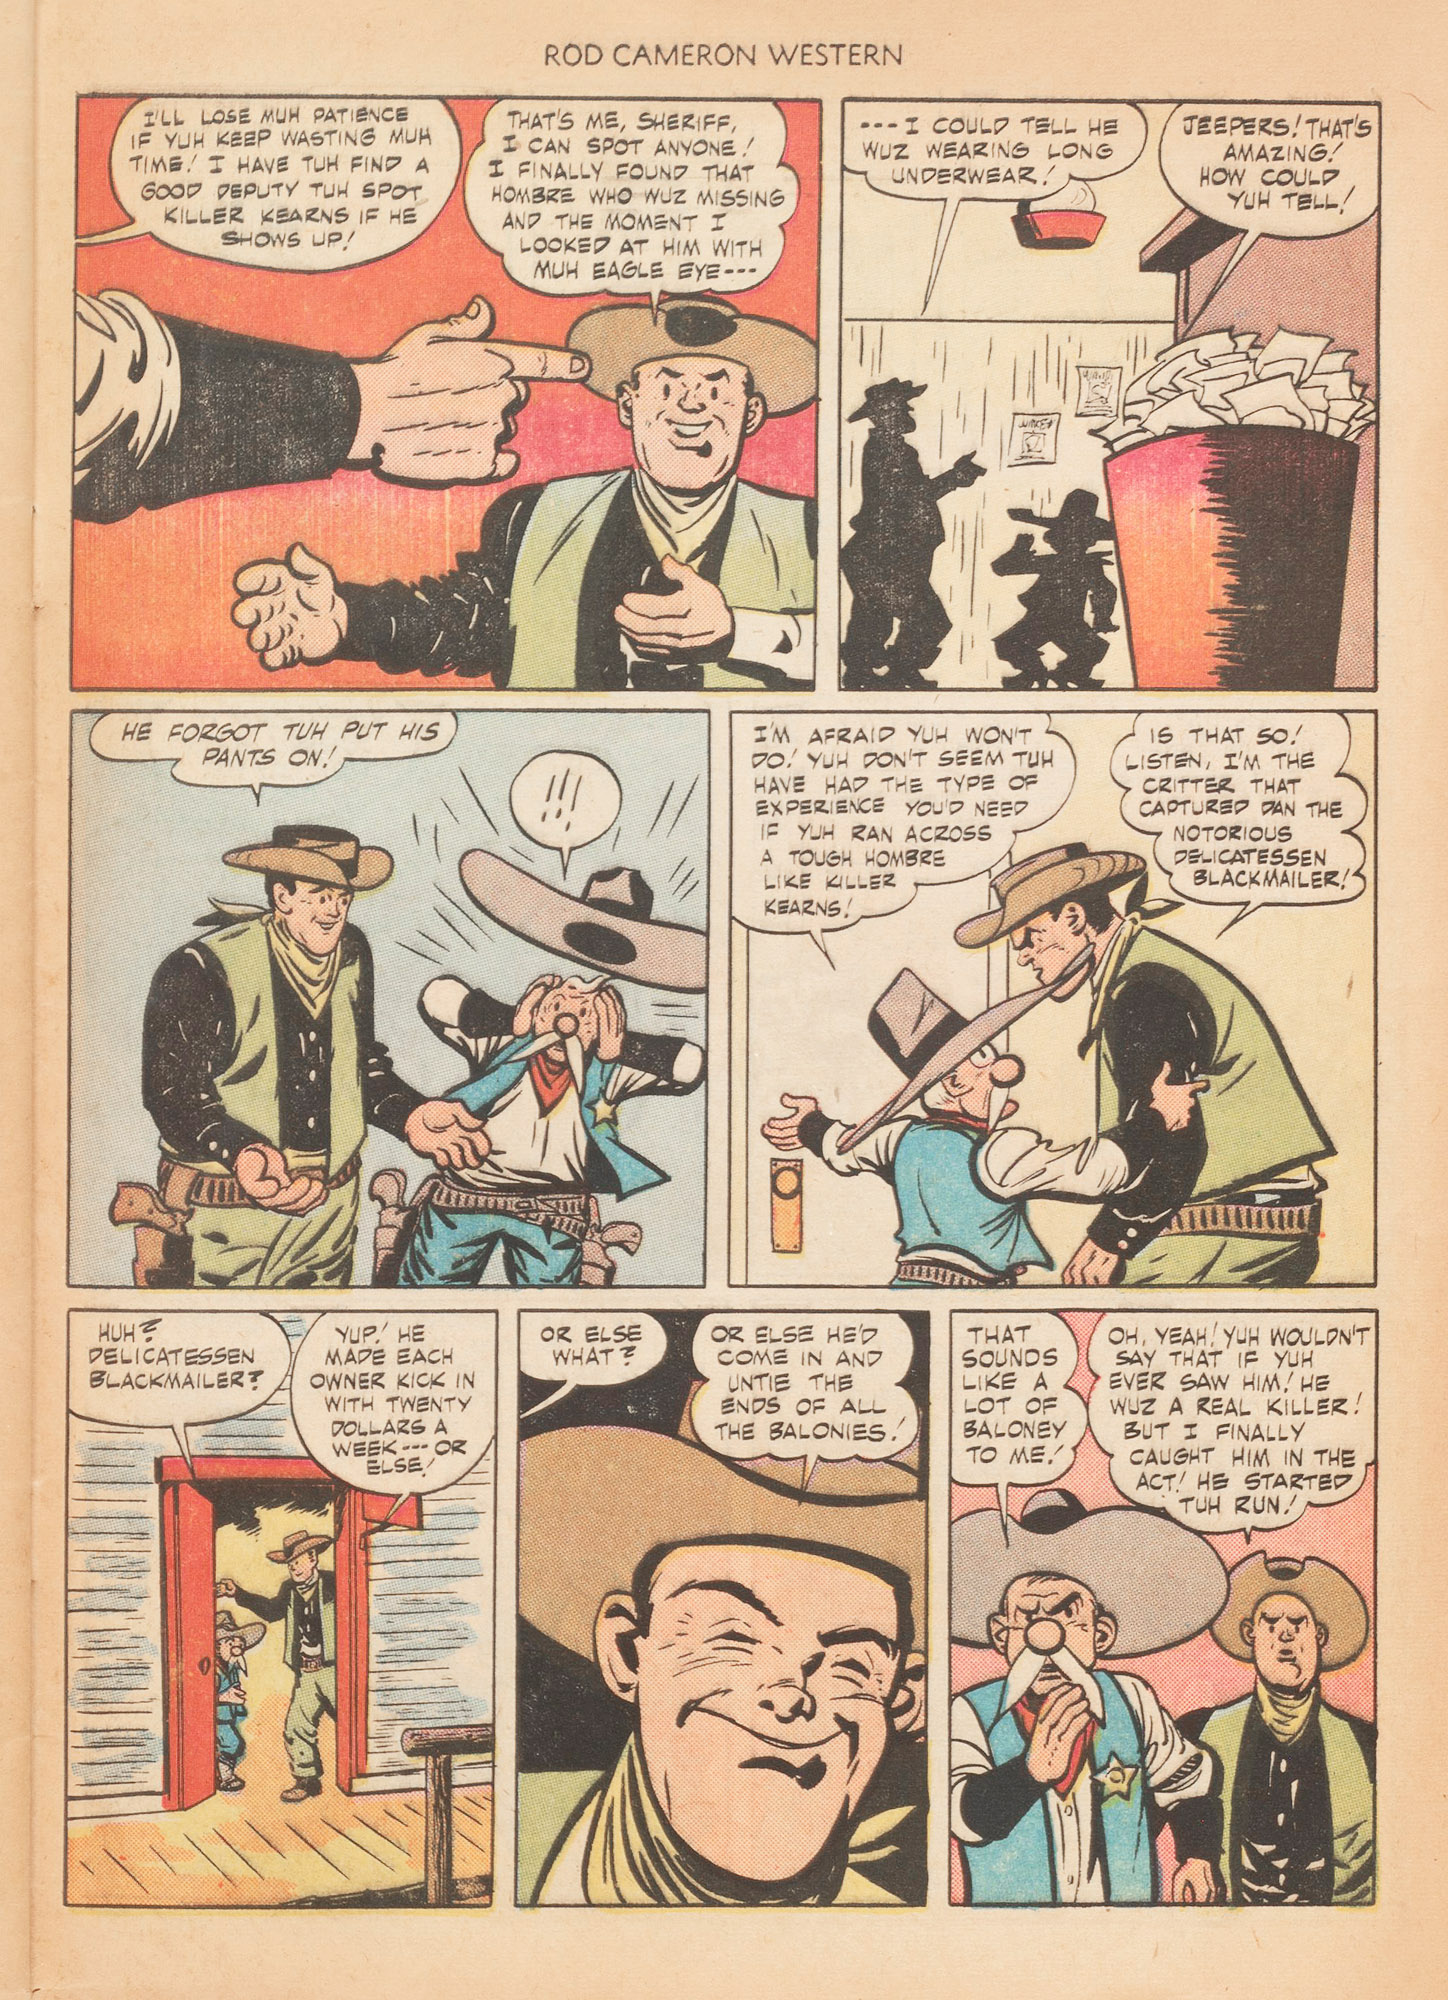 Read online Rod Cameron Western comic -  Issue #4 - 33